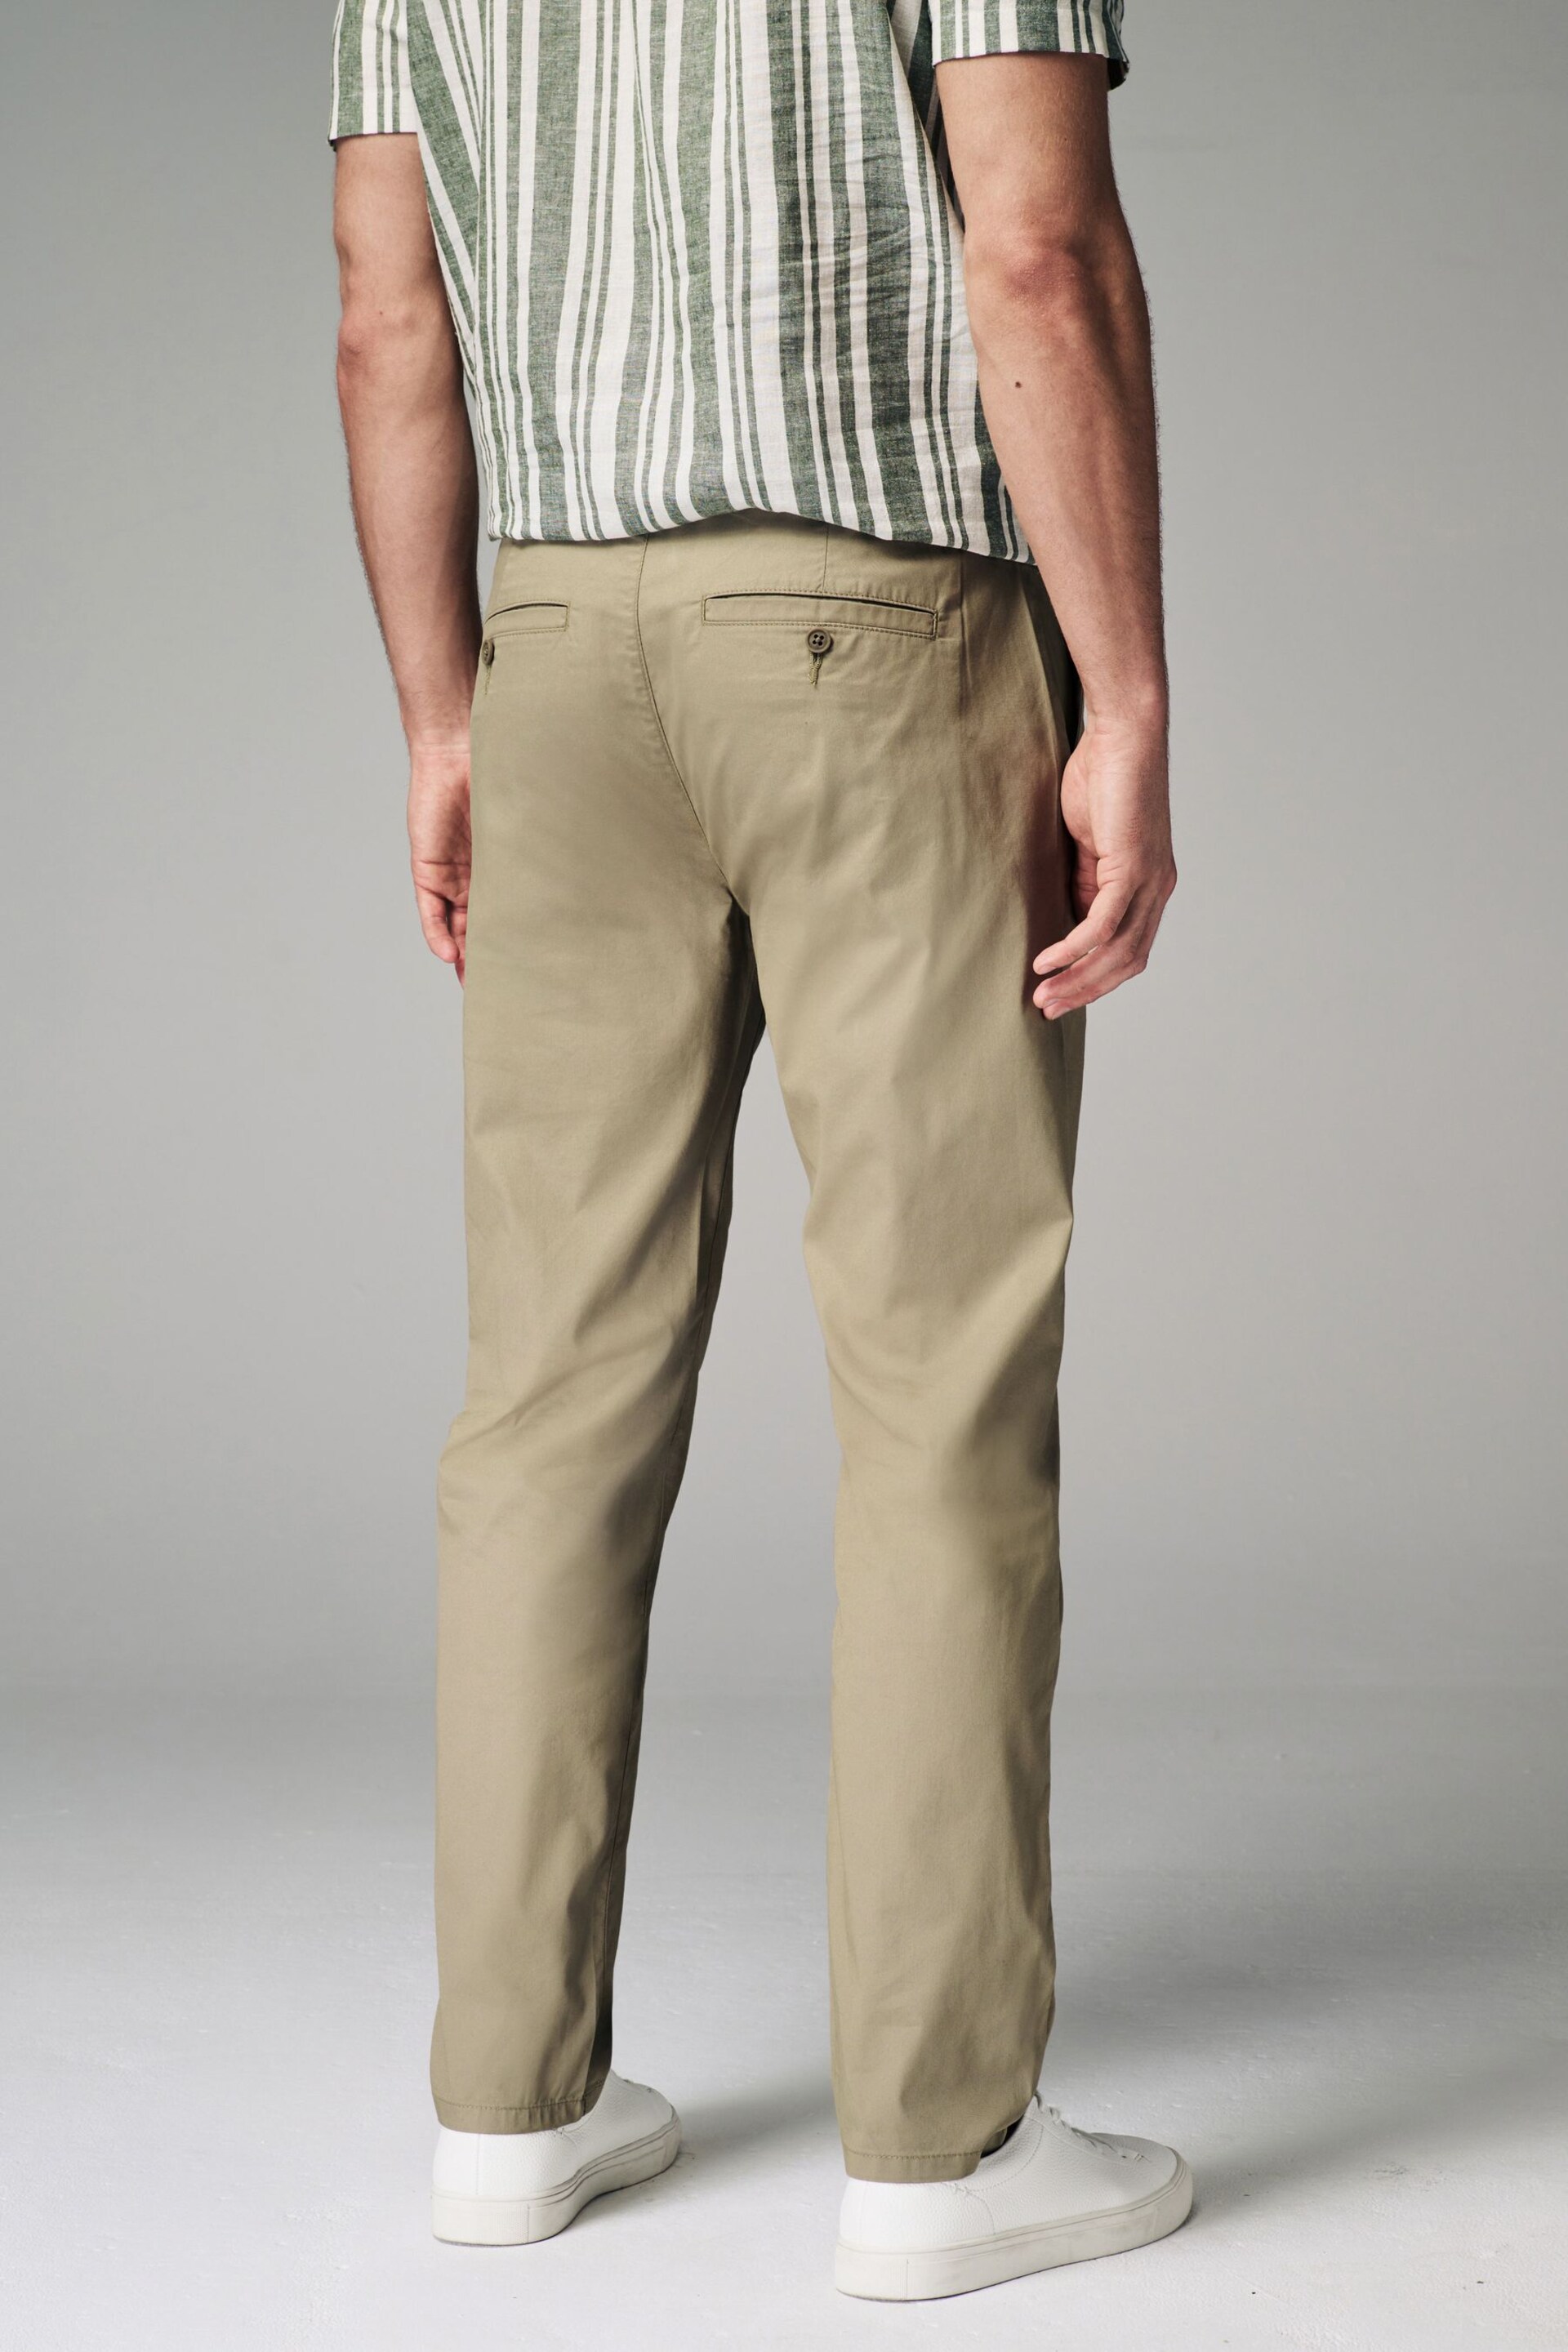 Stone Straight Lightweight Stretch Chino Trousers - Image 4 of 9